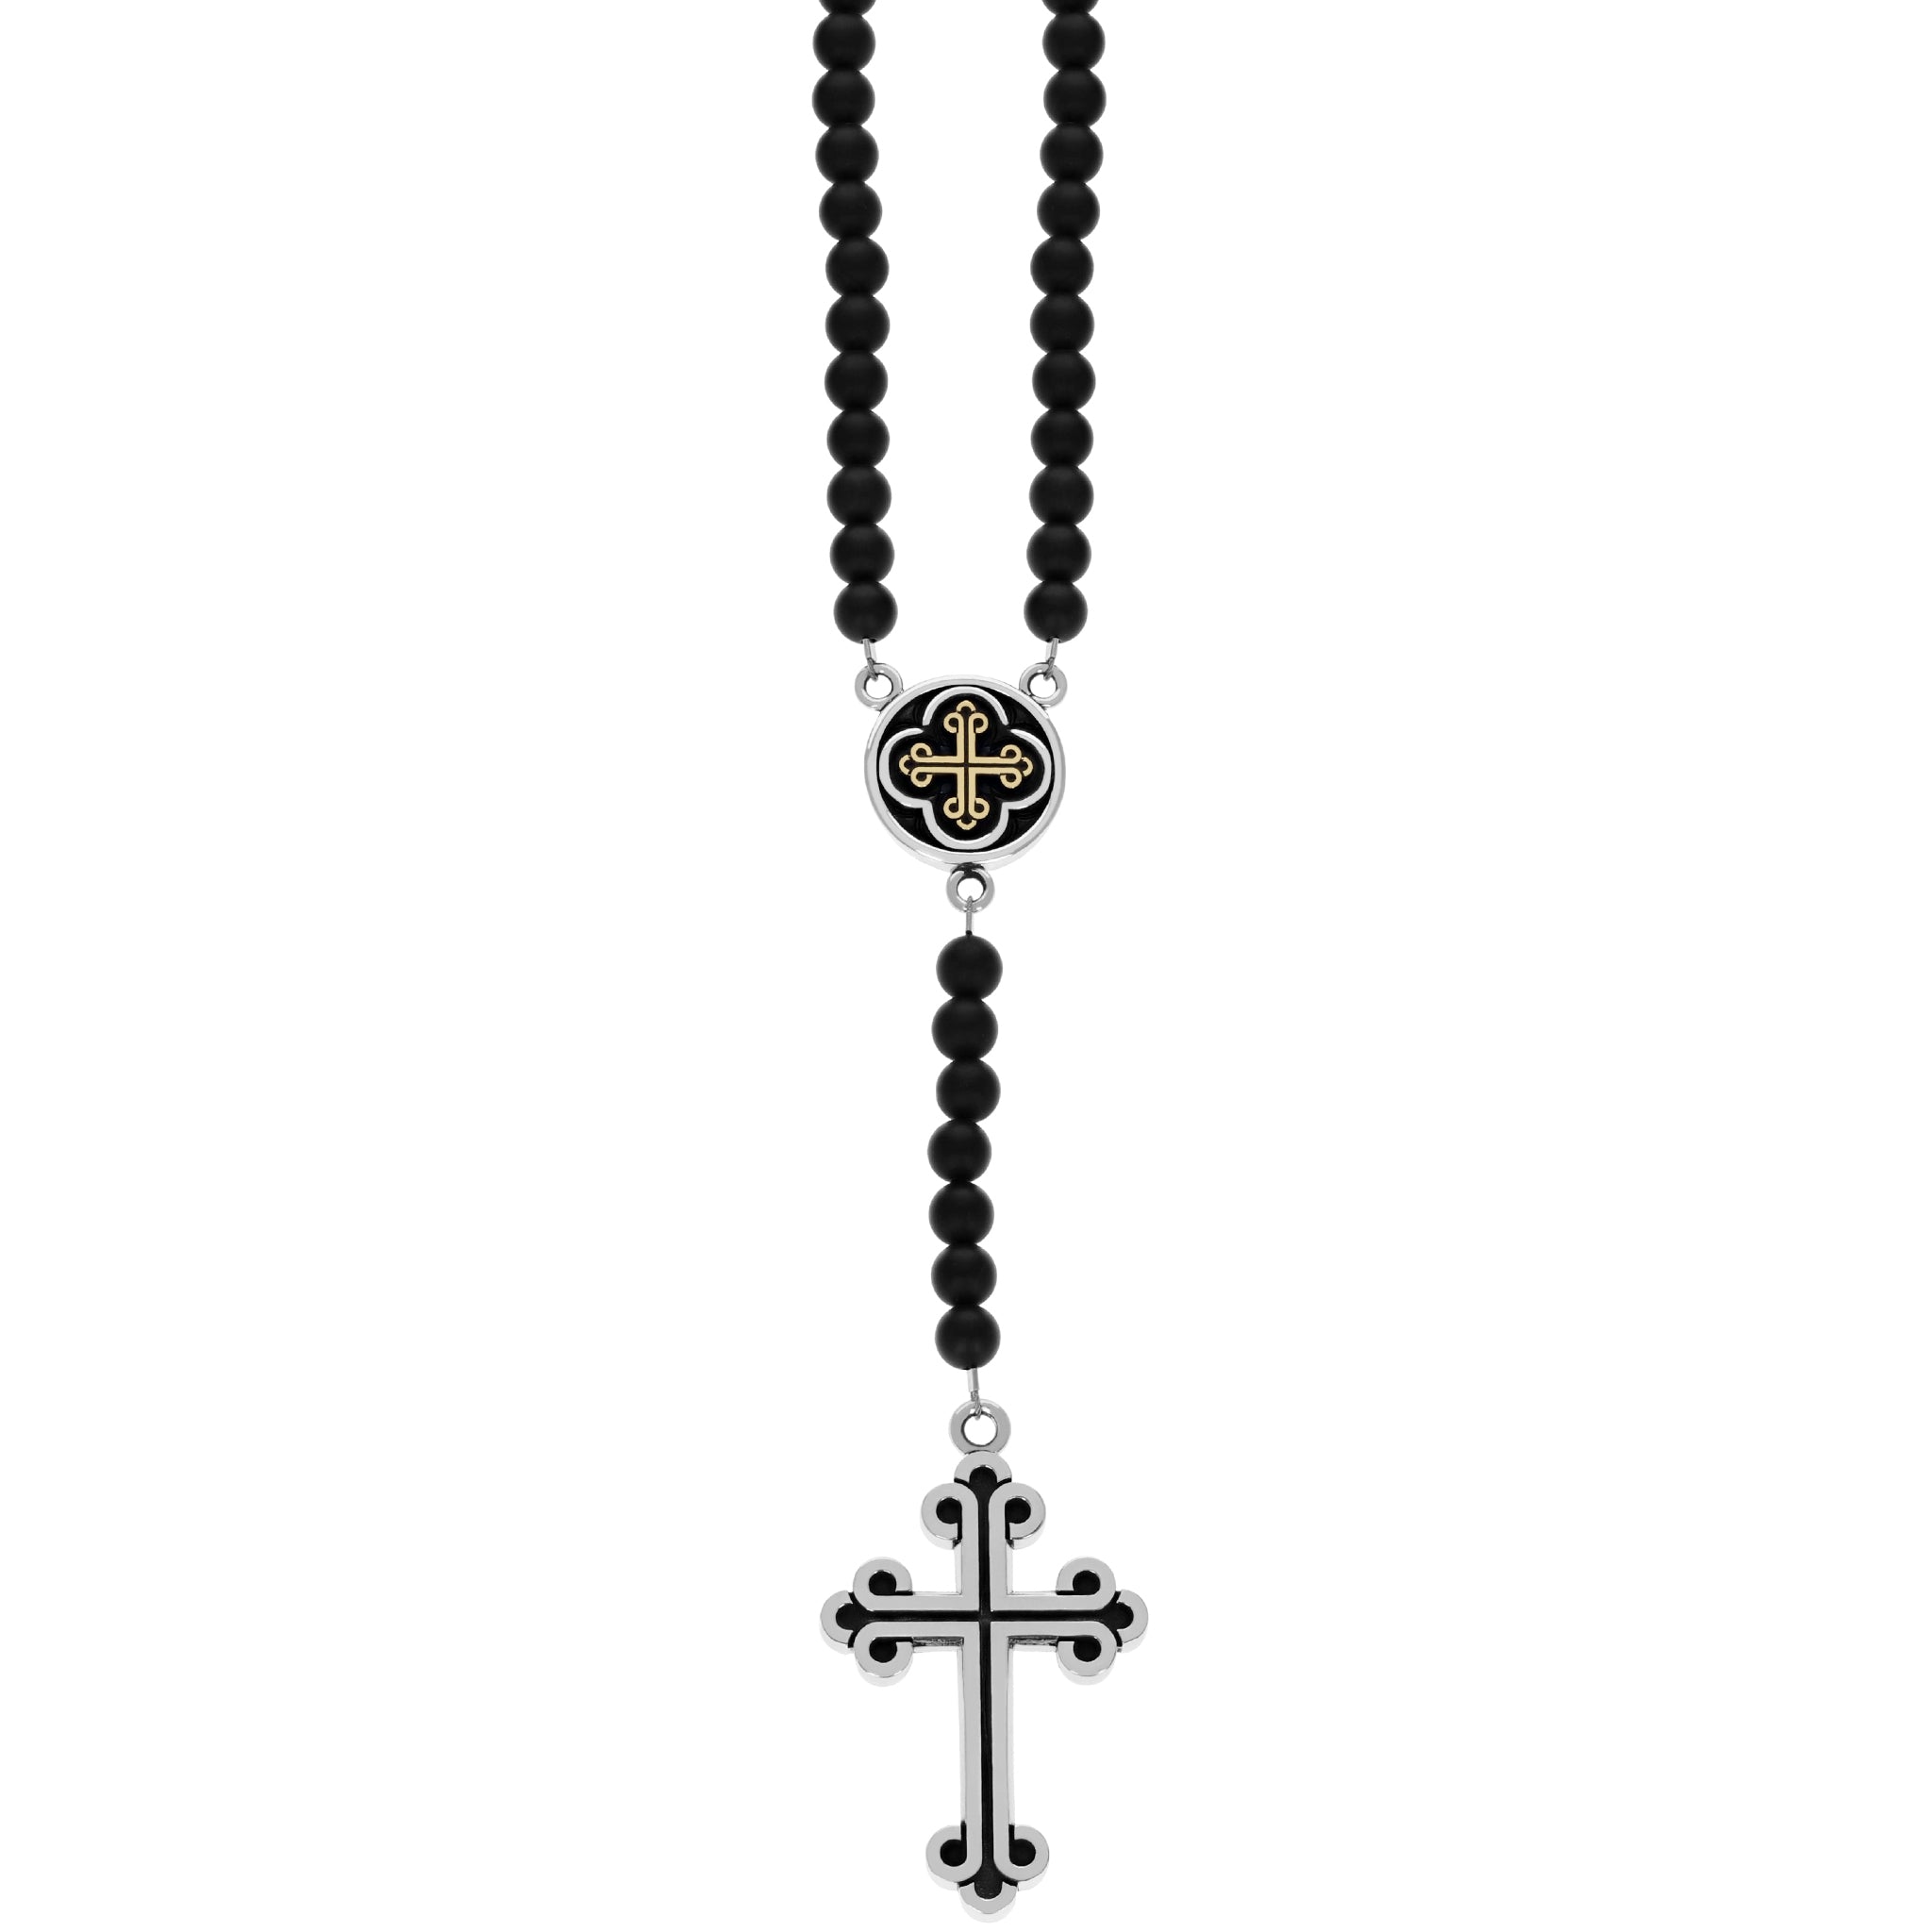 Onyx Bead Rosary w/ Gold Alloy Symmetrical Traditional Cross Center and Large Traditional Cross Drop